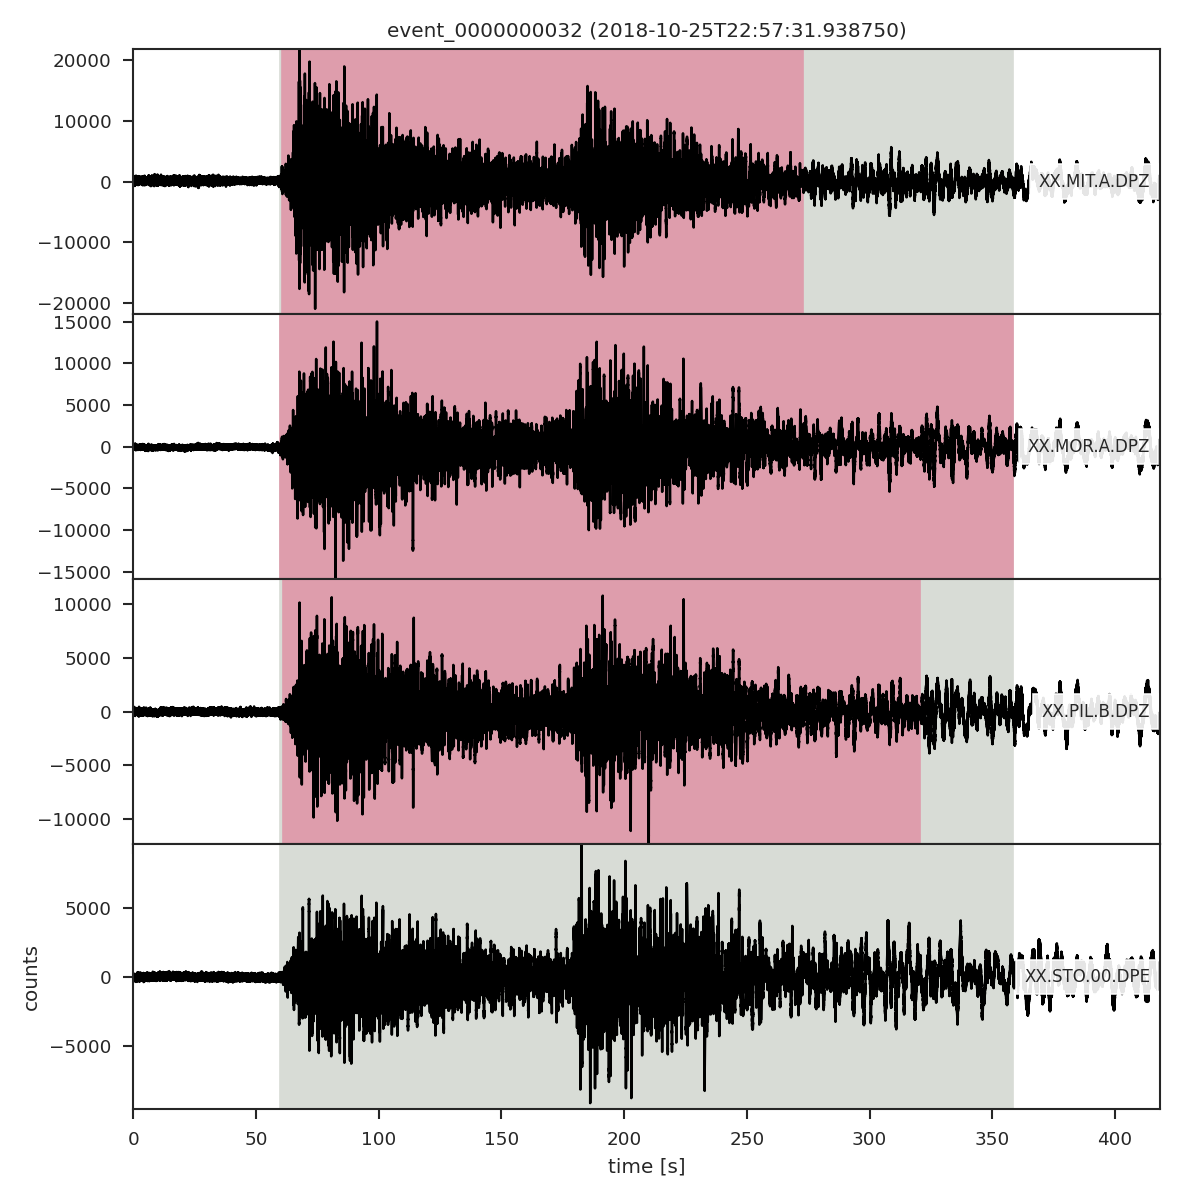 The seismogram image file of the earthquake event. The grey area highlights the event limits, the red area indicates the detections related to the event.